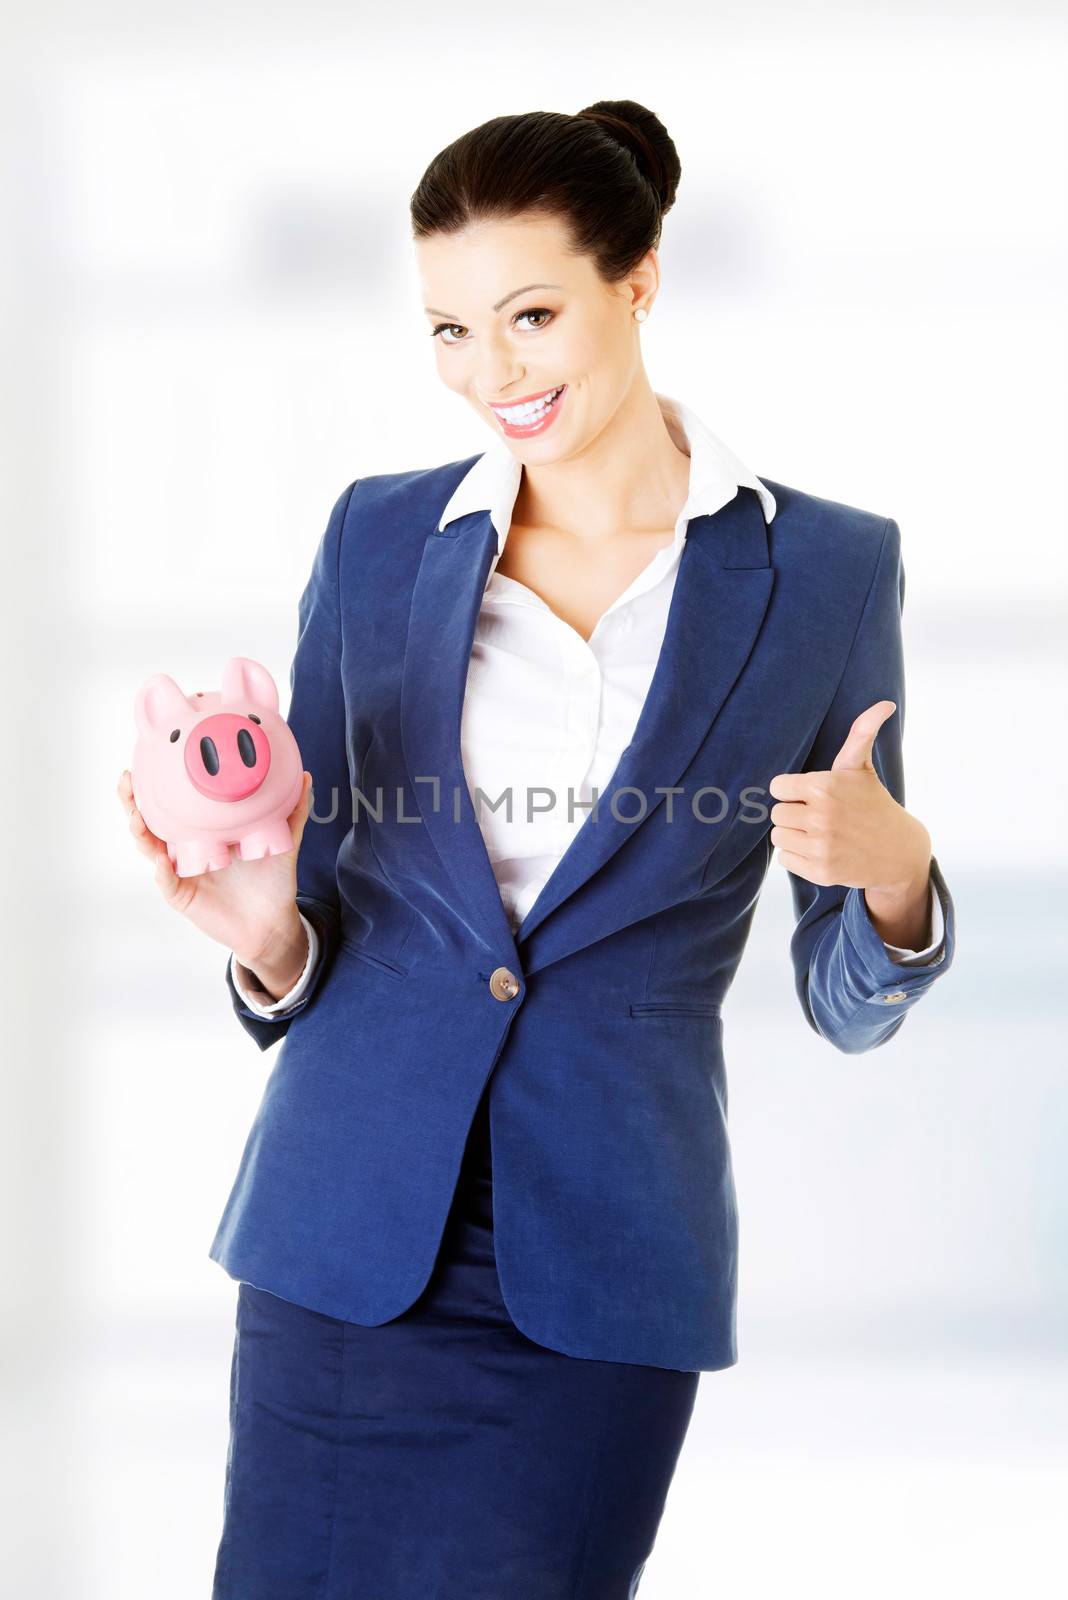 Portrait of young businesswoman isolated on white